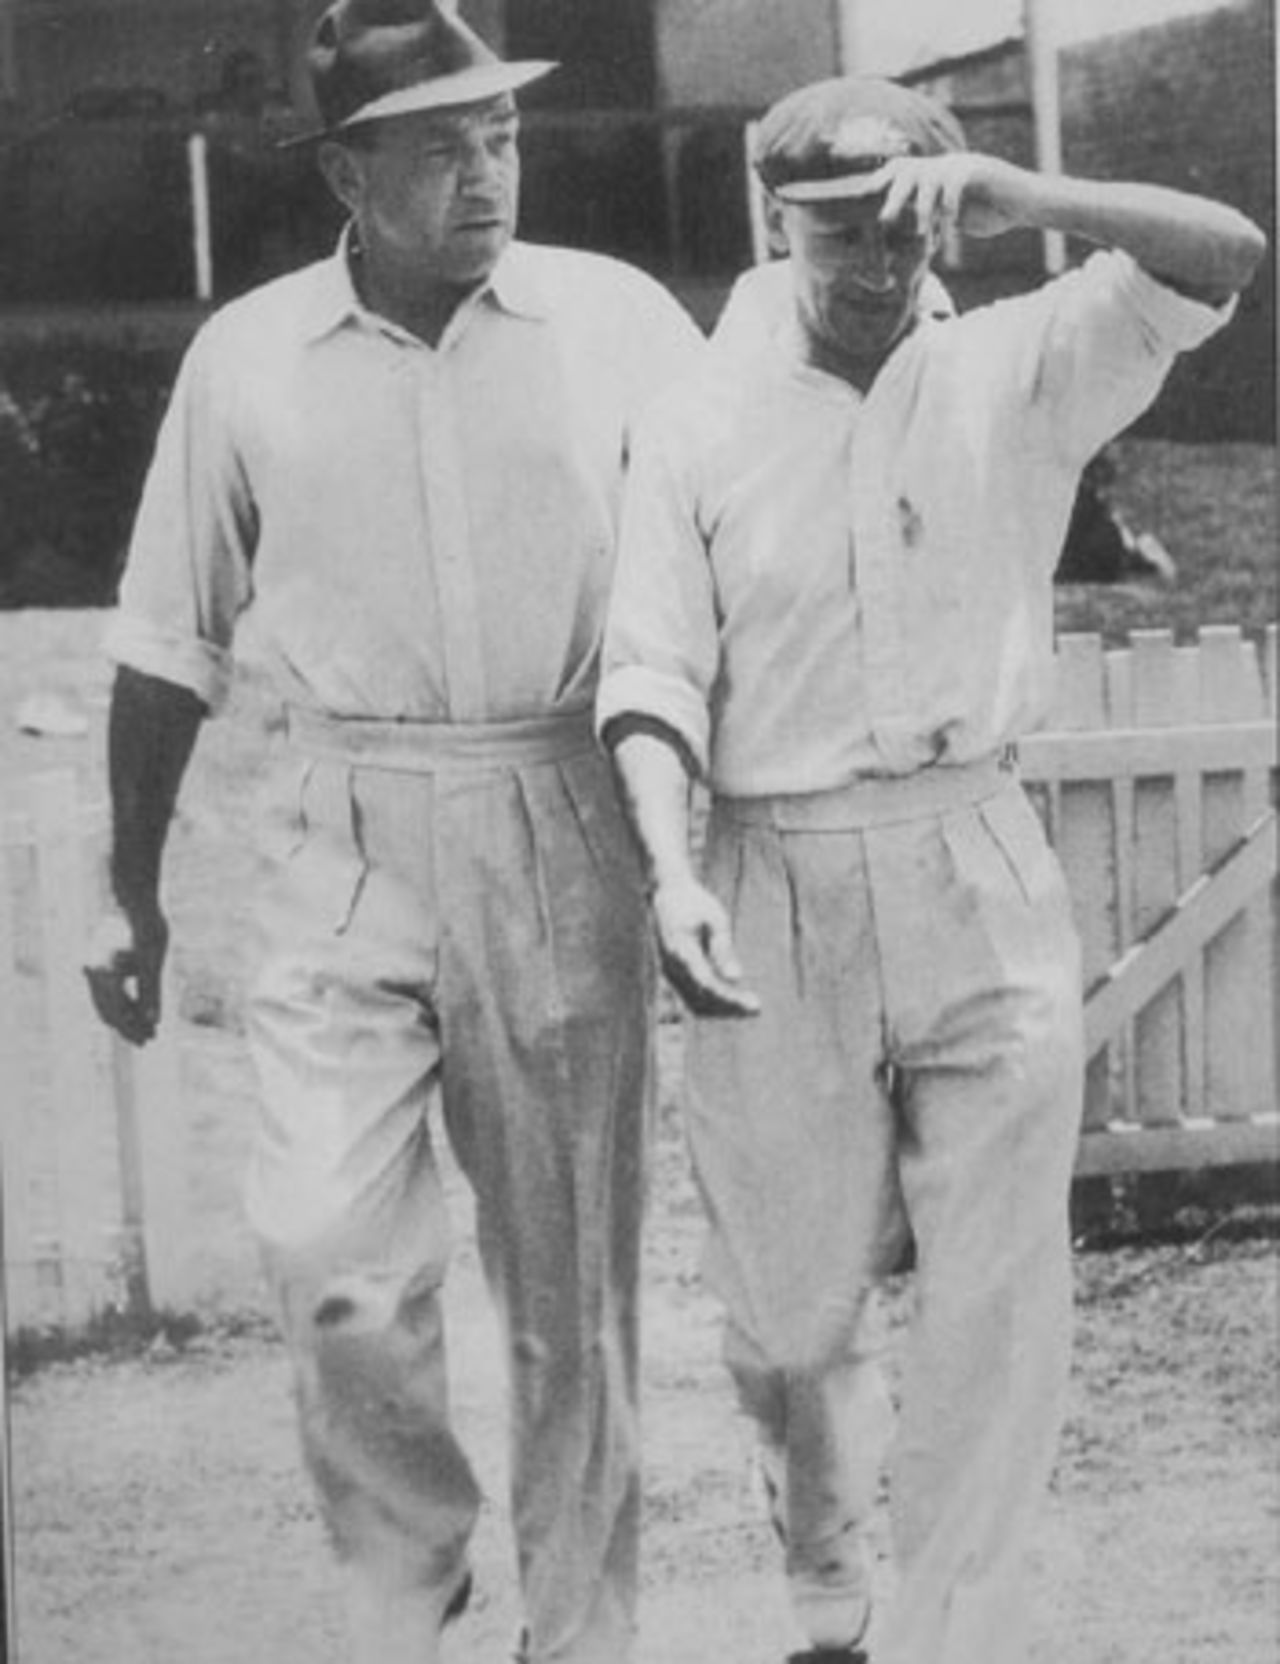 Wally Hammond and Don Bradman go out to toss at the start of the 1946-47 series, Brisbane, November 29, 1946